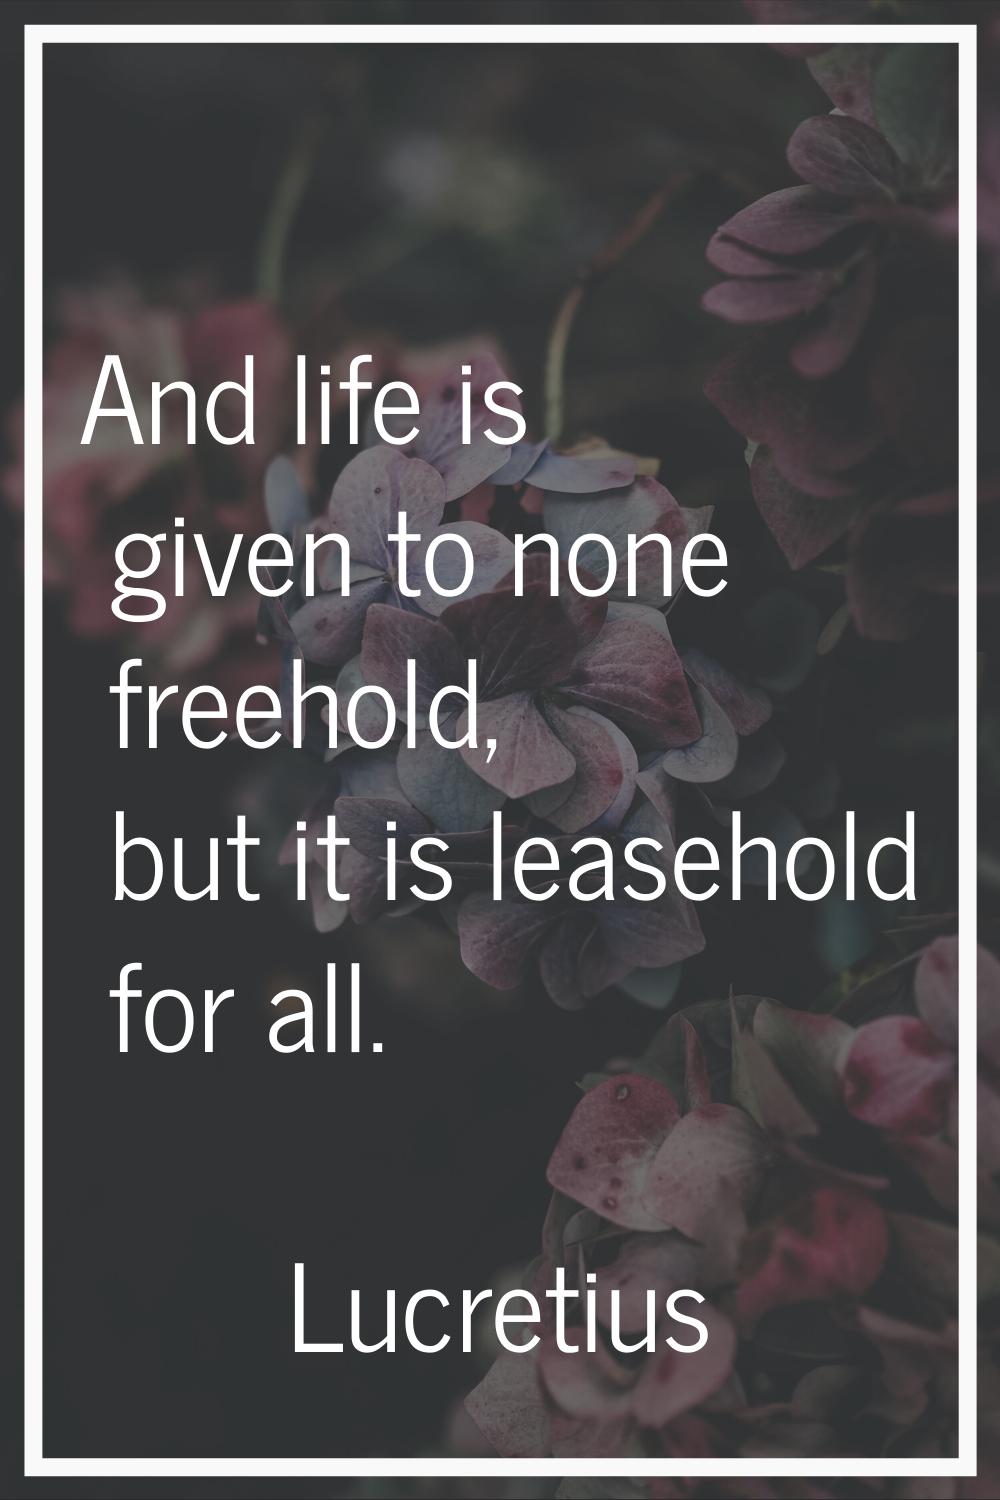 And life is given to none freehold, but it is leasehold for all.